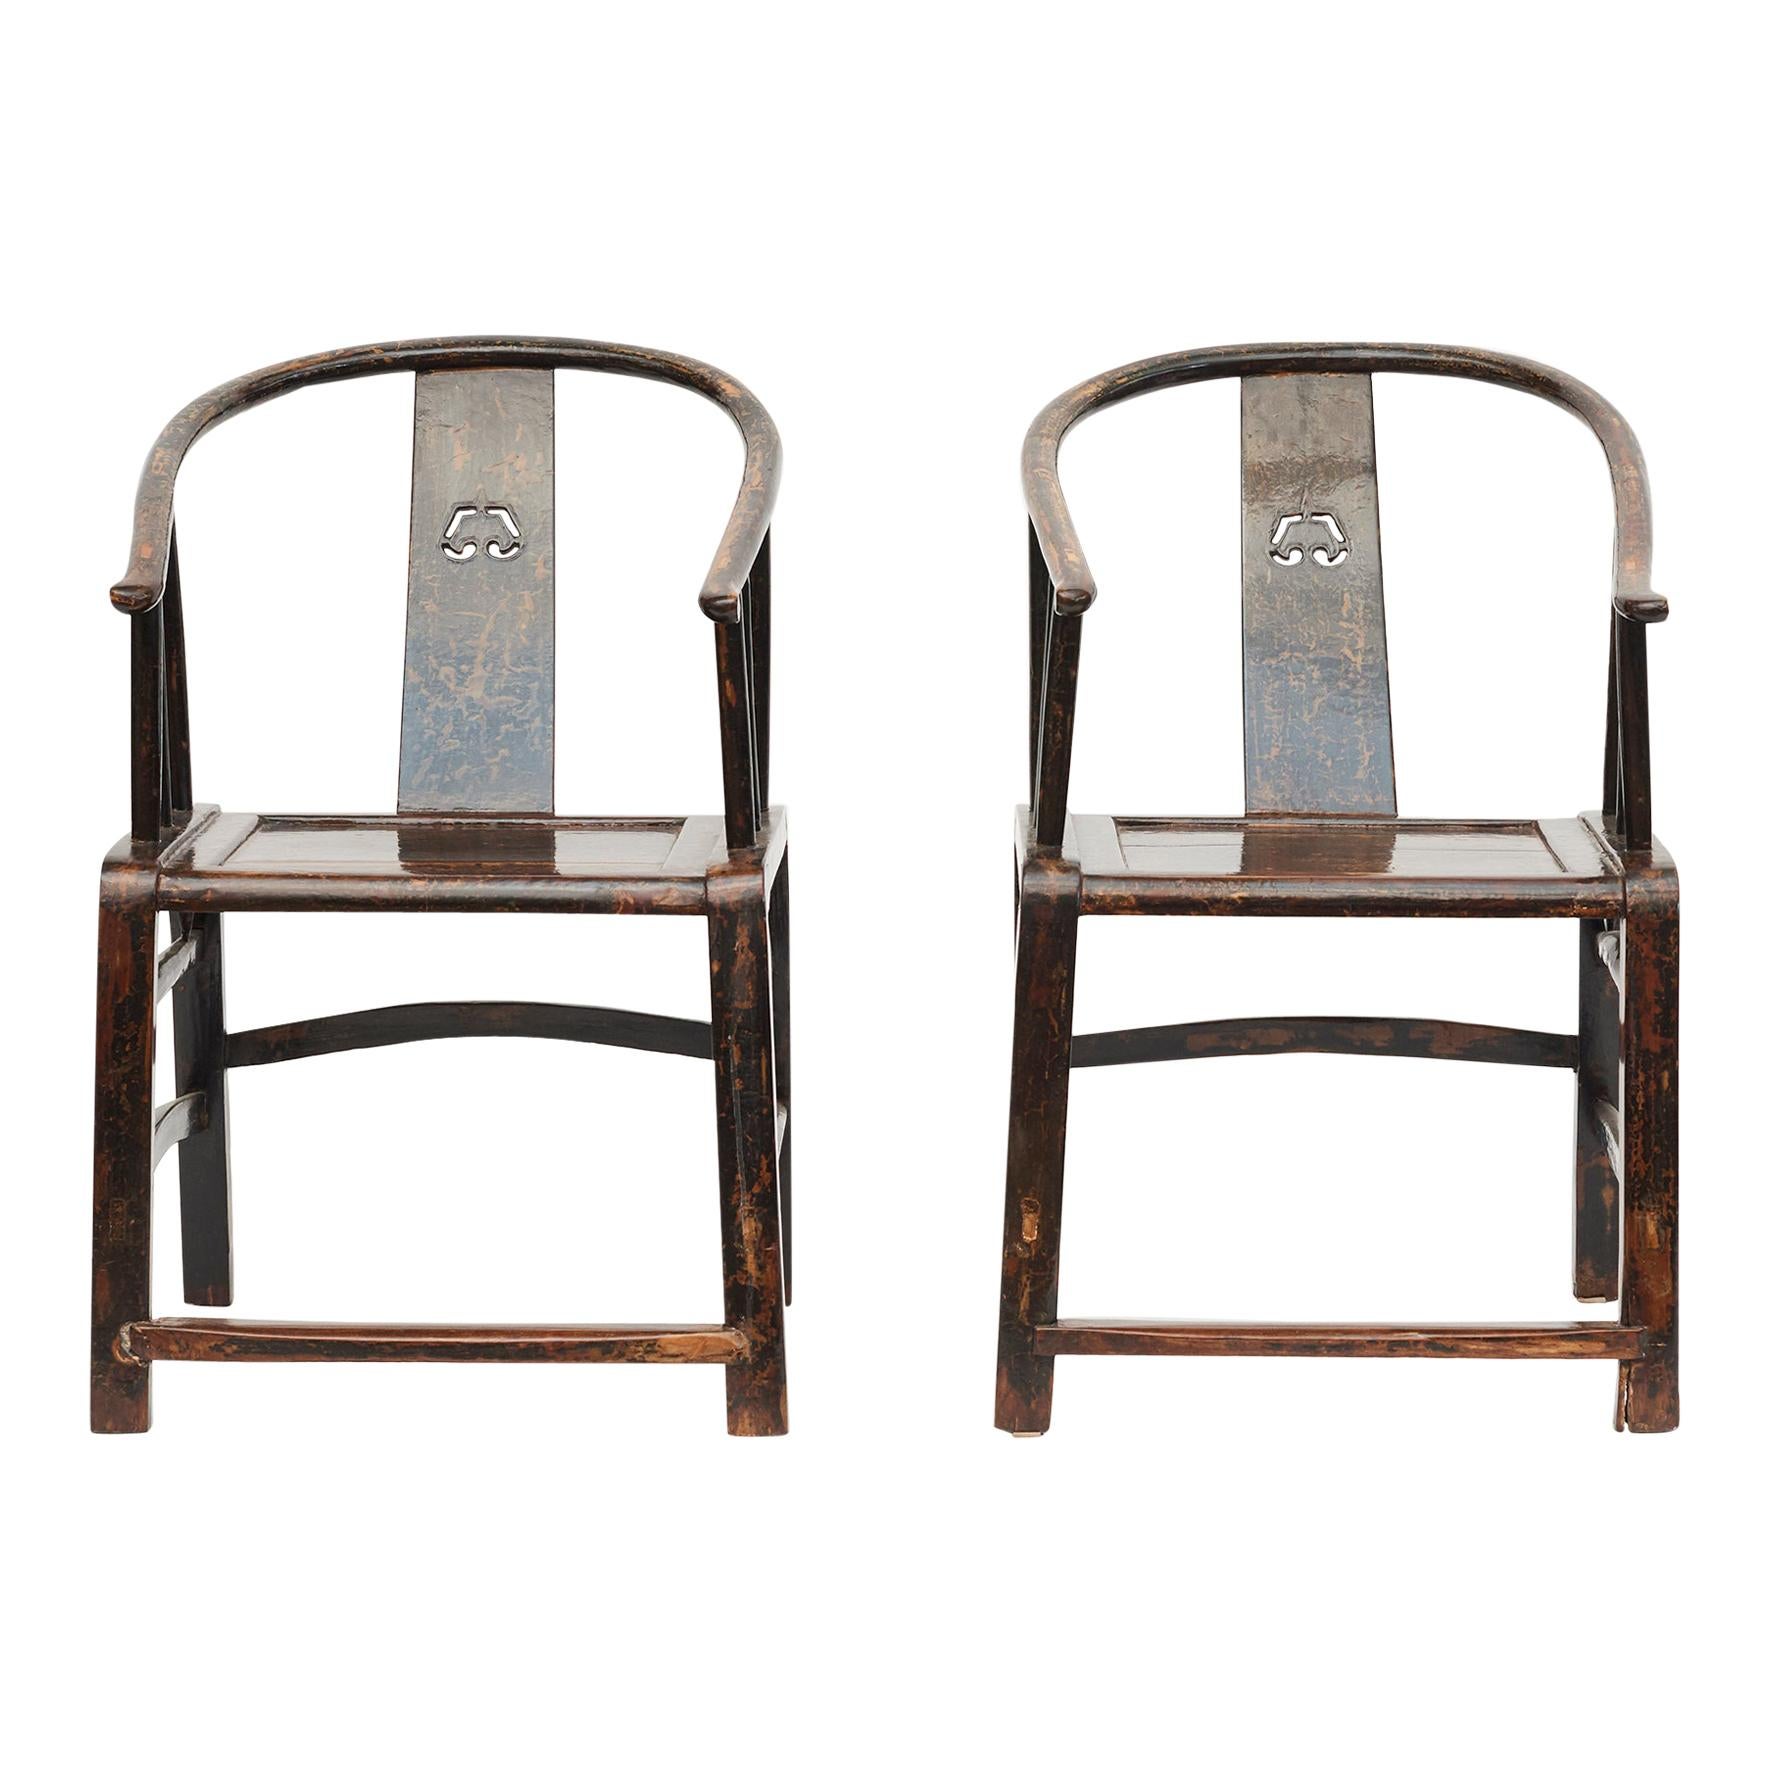 Pair of Early 19th Century Chinese 'Lazy Chairs' in Walnut and Black Lacquer